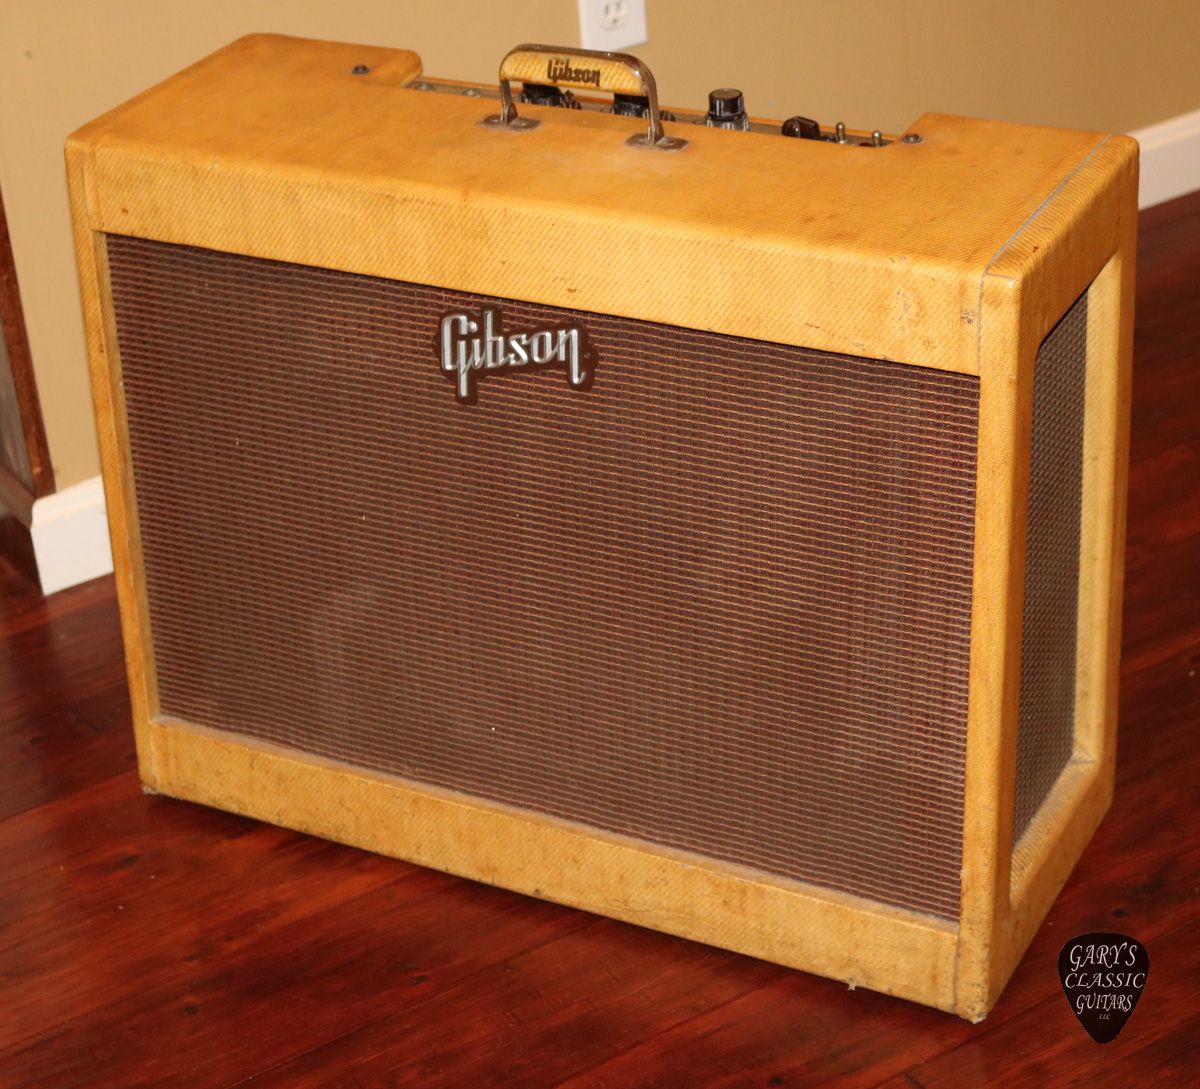 Gibson Guitars Amplifiers1959年ヴィンテージカタログ+